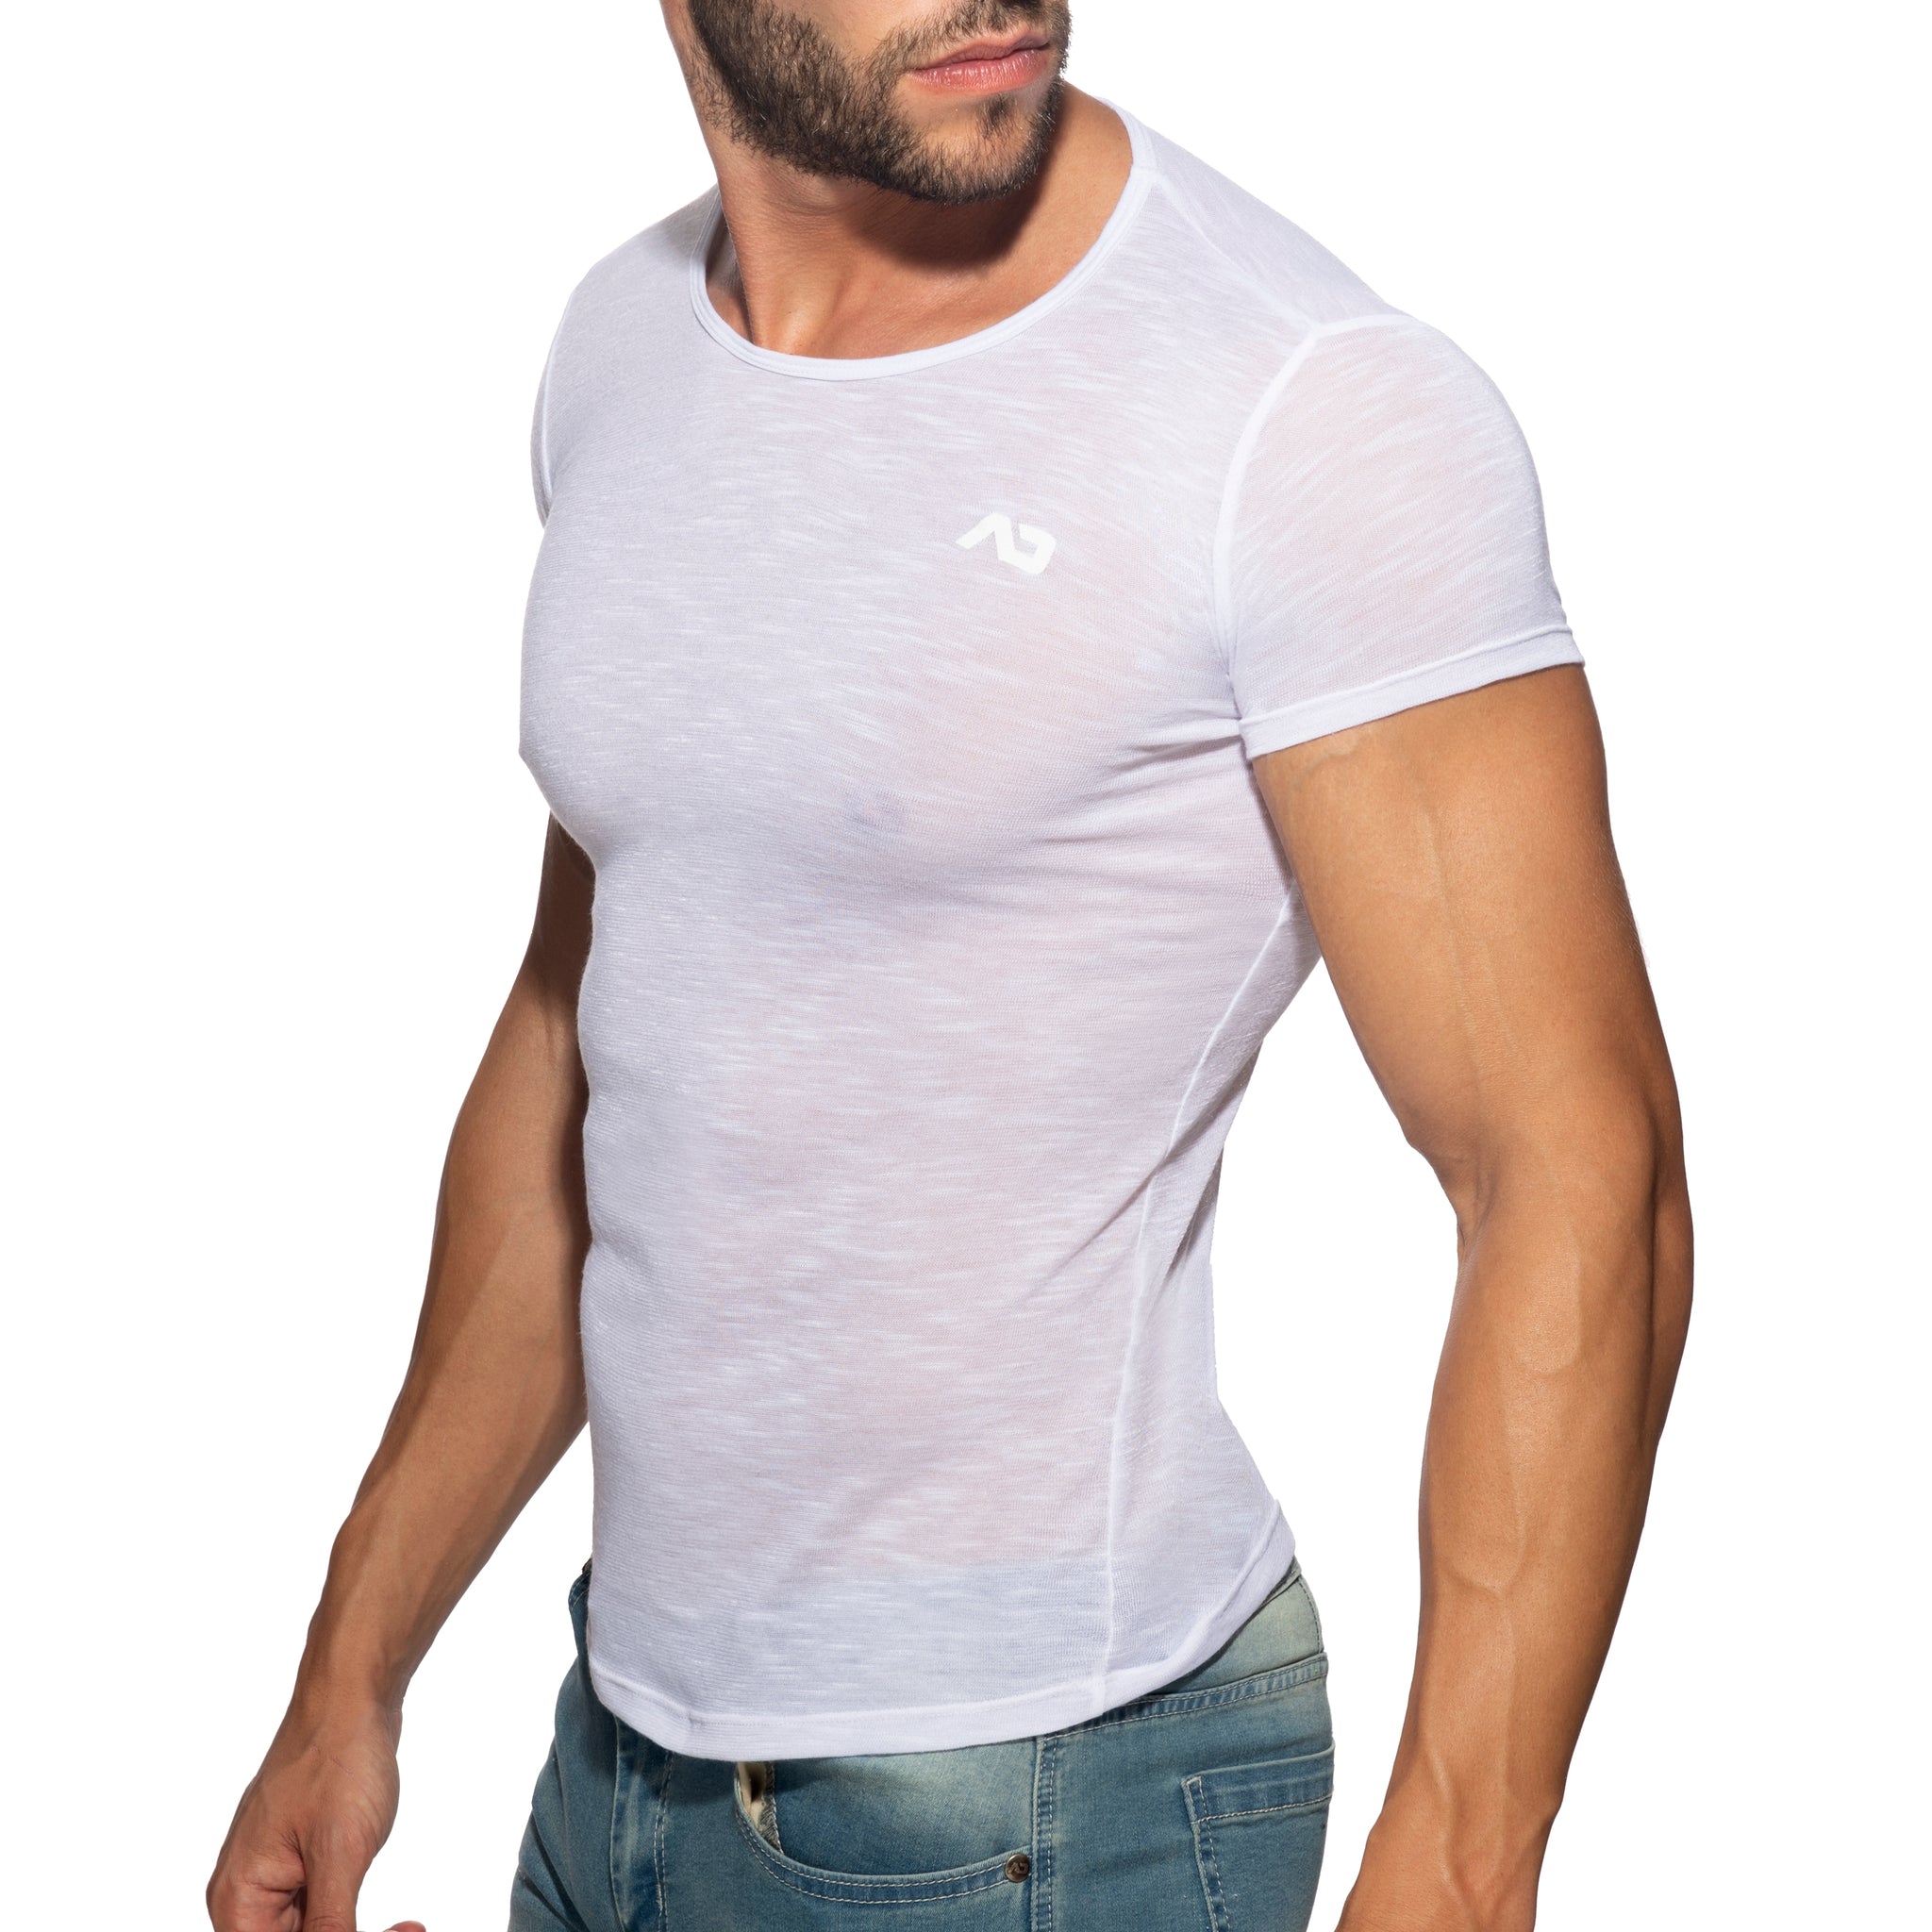 Addicted Thin Flame T-Shirt White AD1109